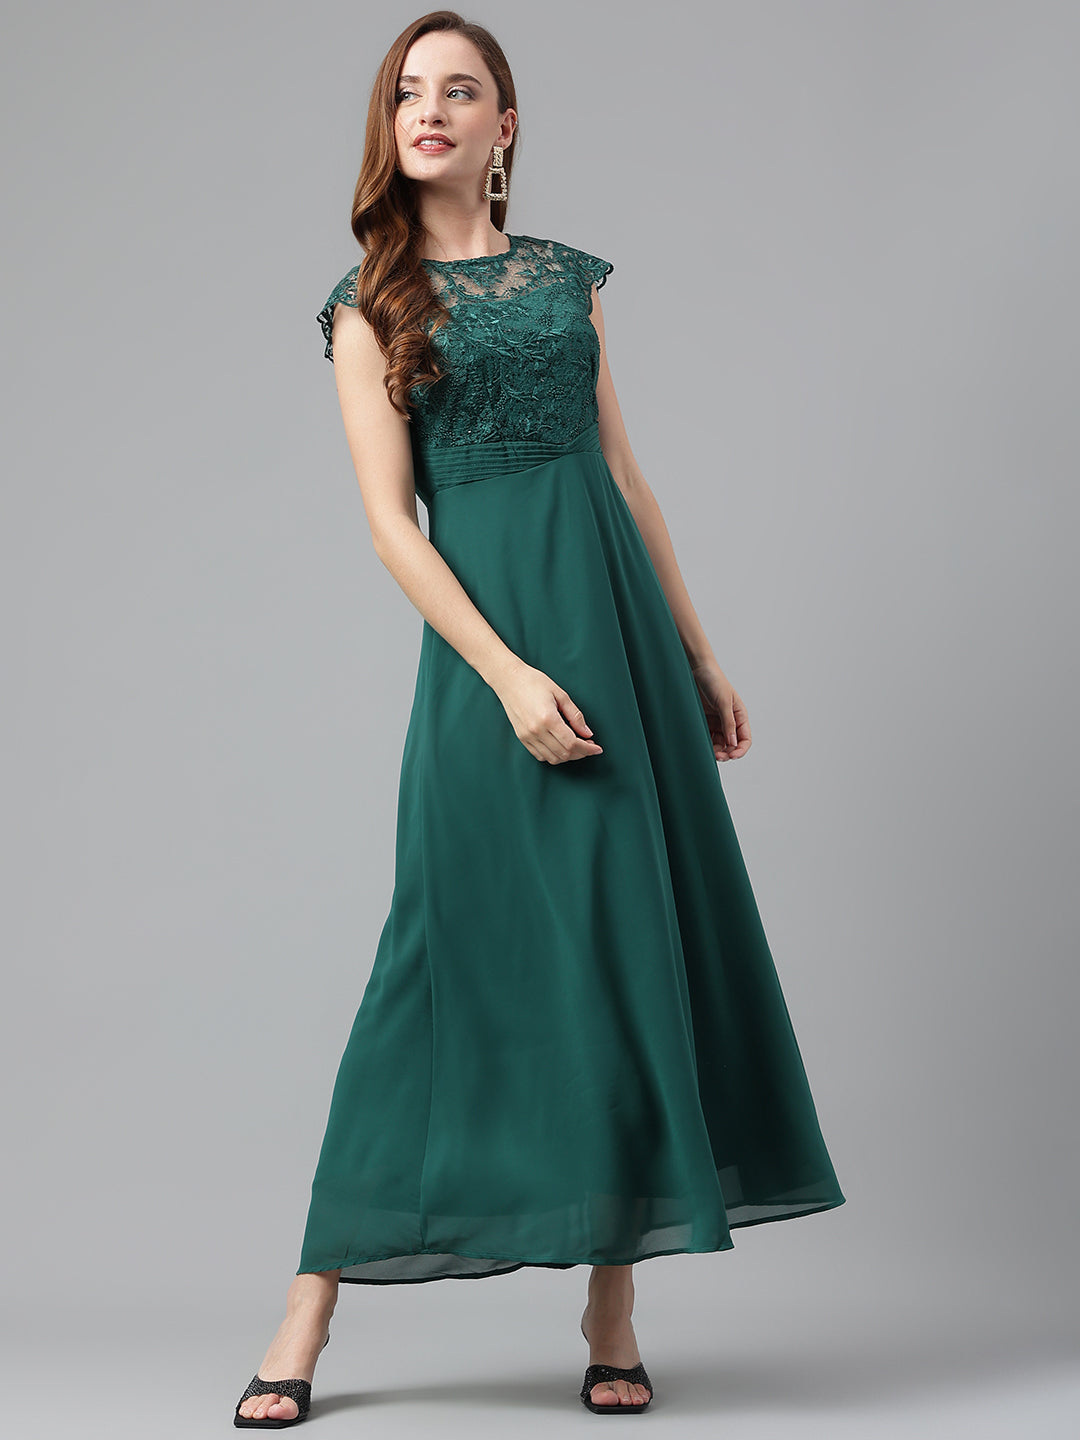 Green Forts Cap Sleeve Solid Sequin Dress